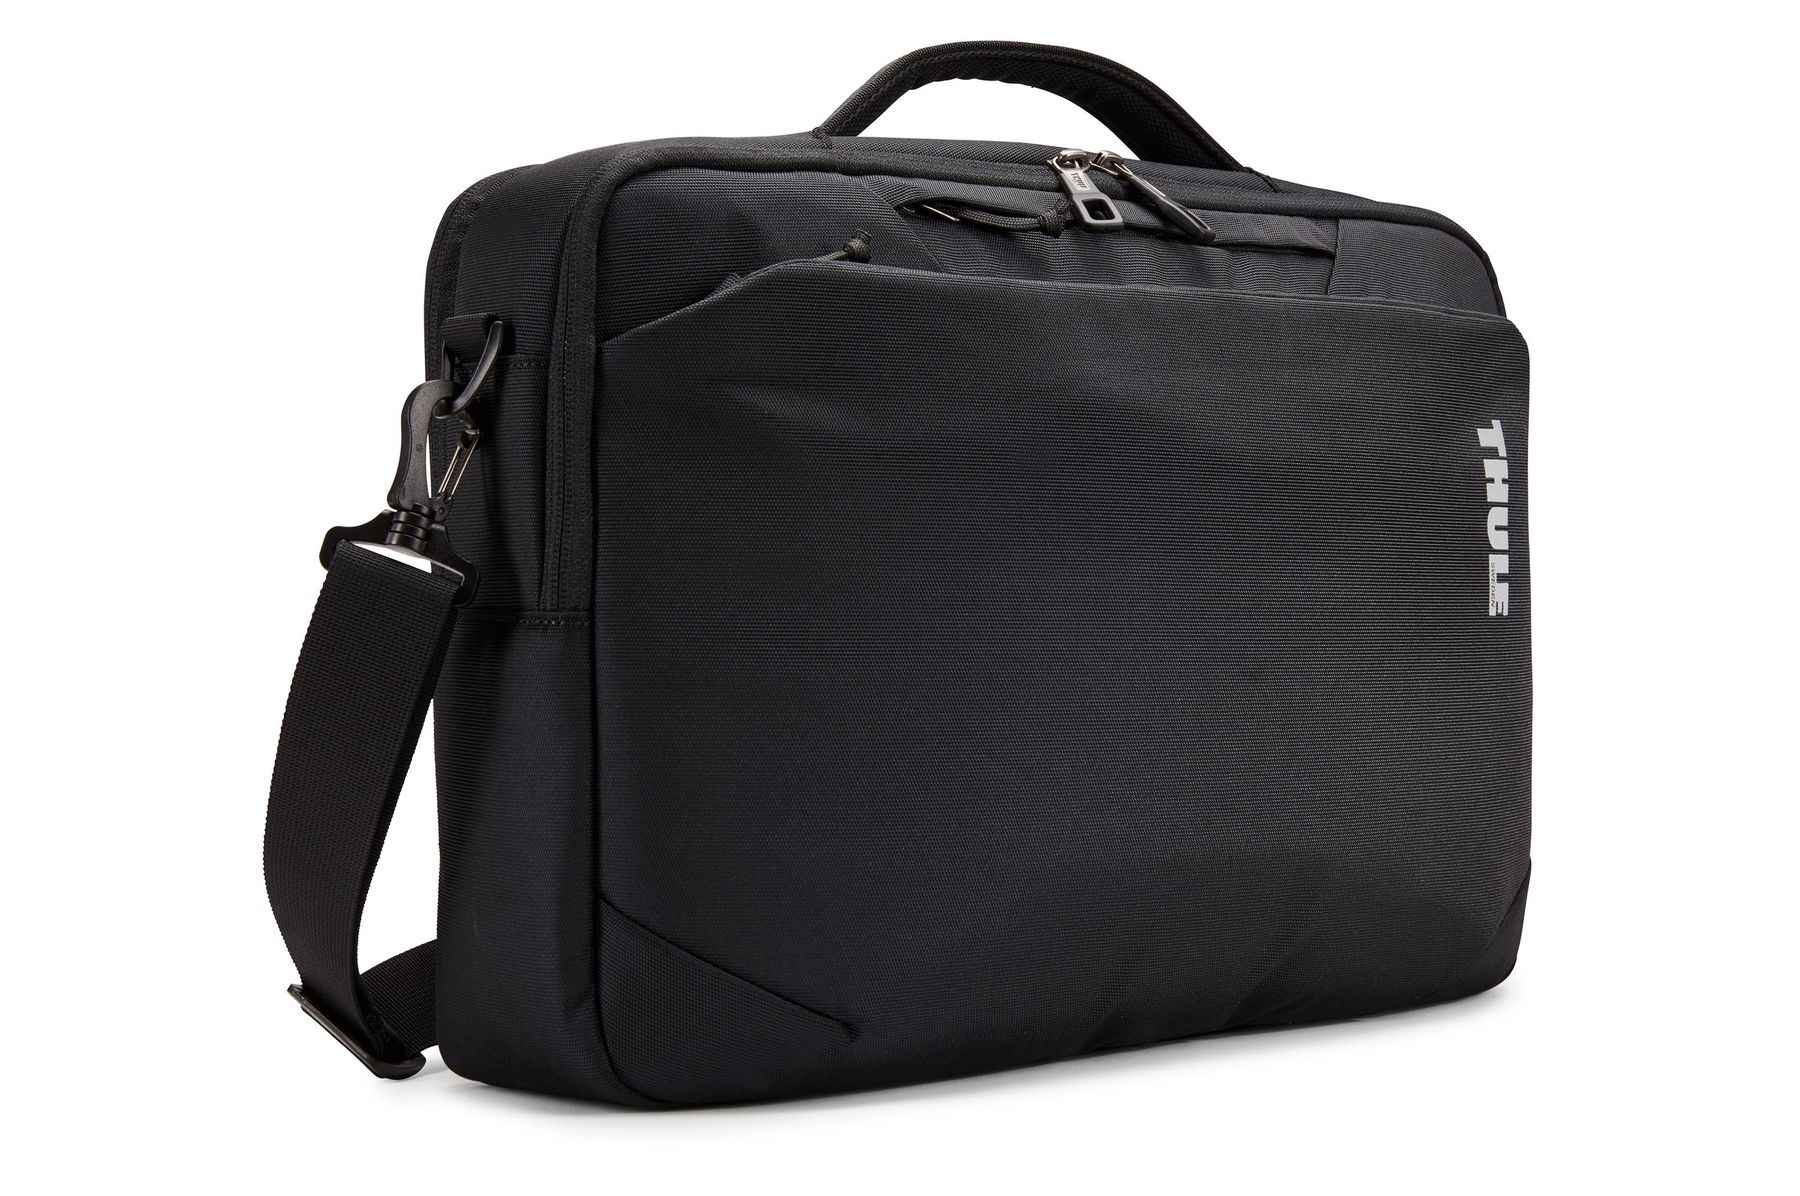 You’ll definitely need a laptop bag if you have a laptop